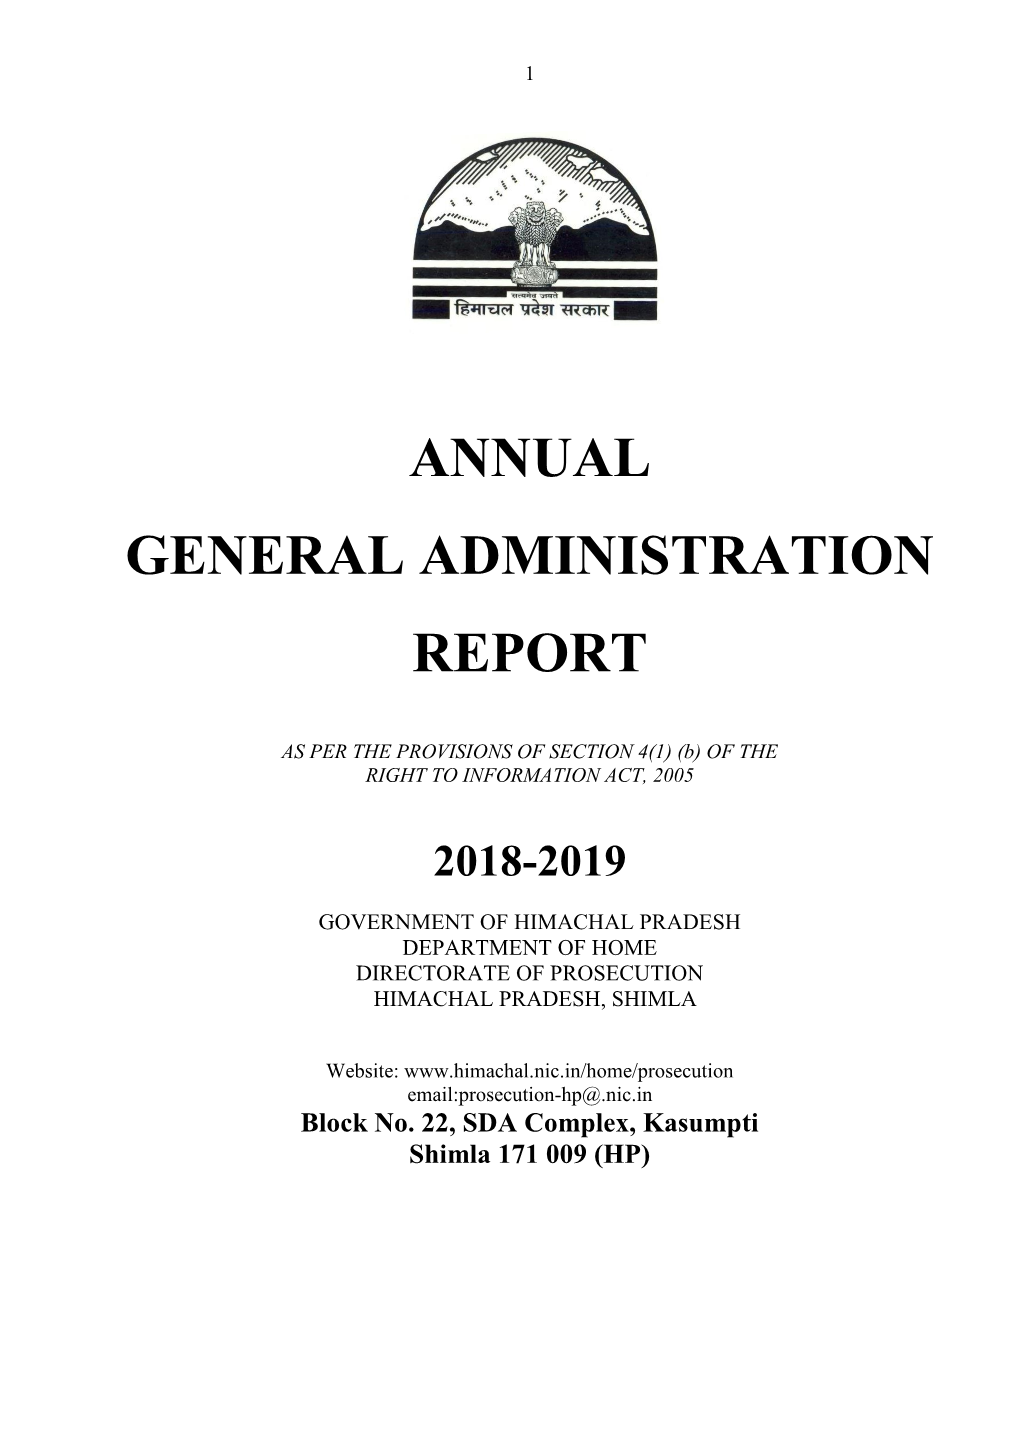 Annual General Administration Report 2018-19 25 4